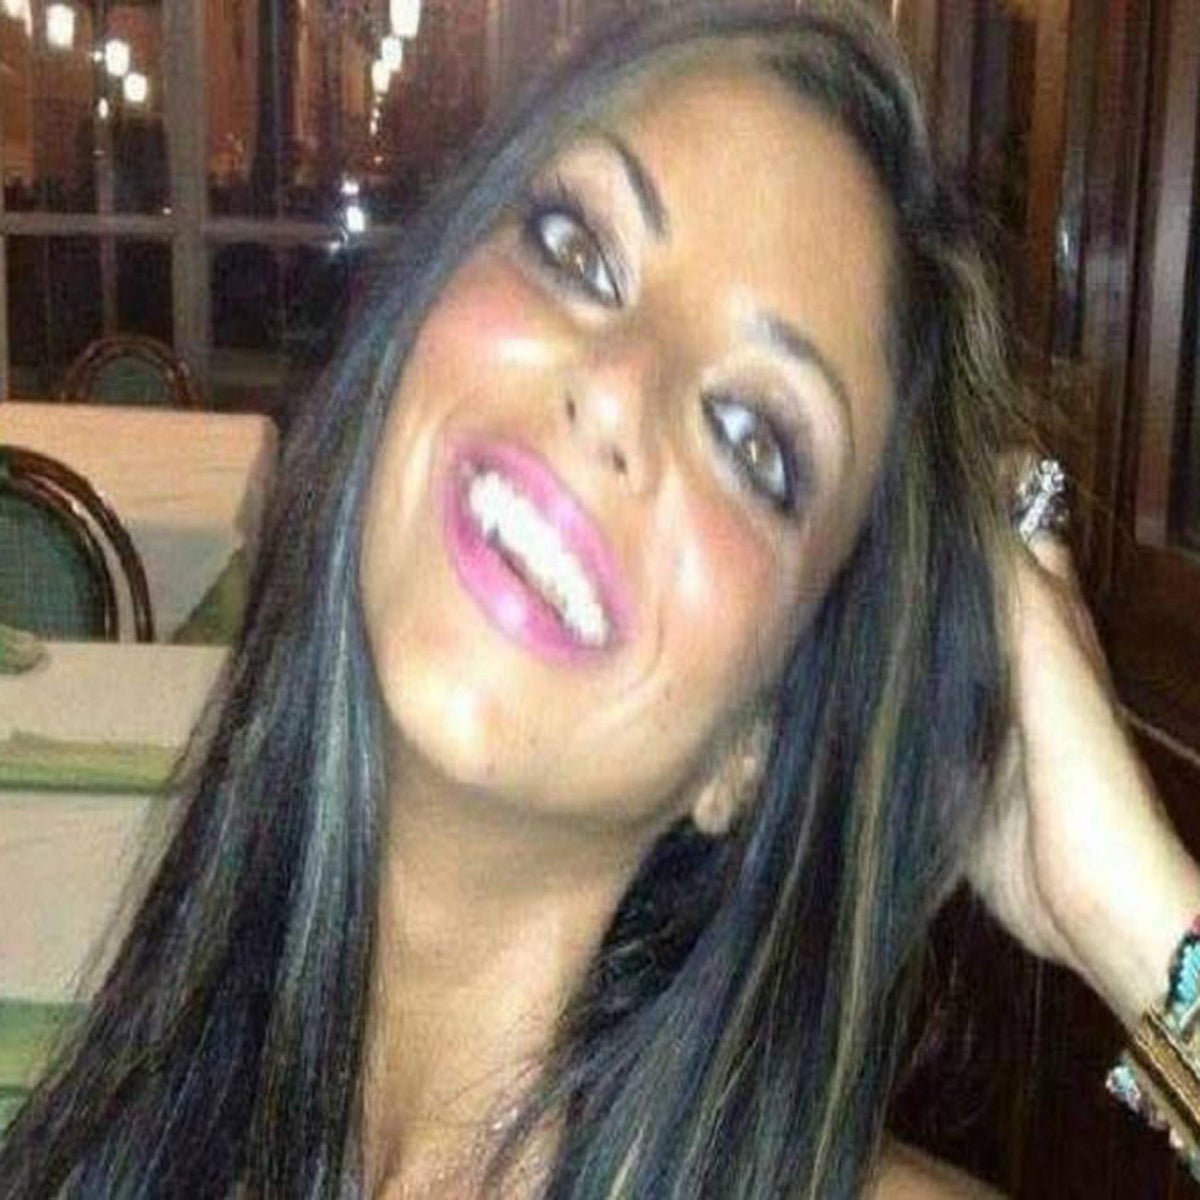 Revenge Porn Tiziana Cantone - Investigation launched into death of Italian woman who killed herself after  explicit images went viral | The Independent | The Independent